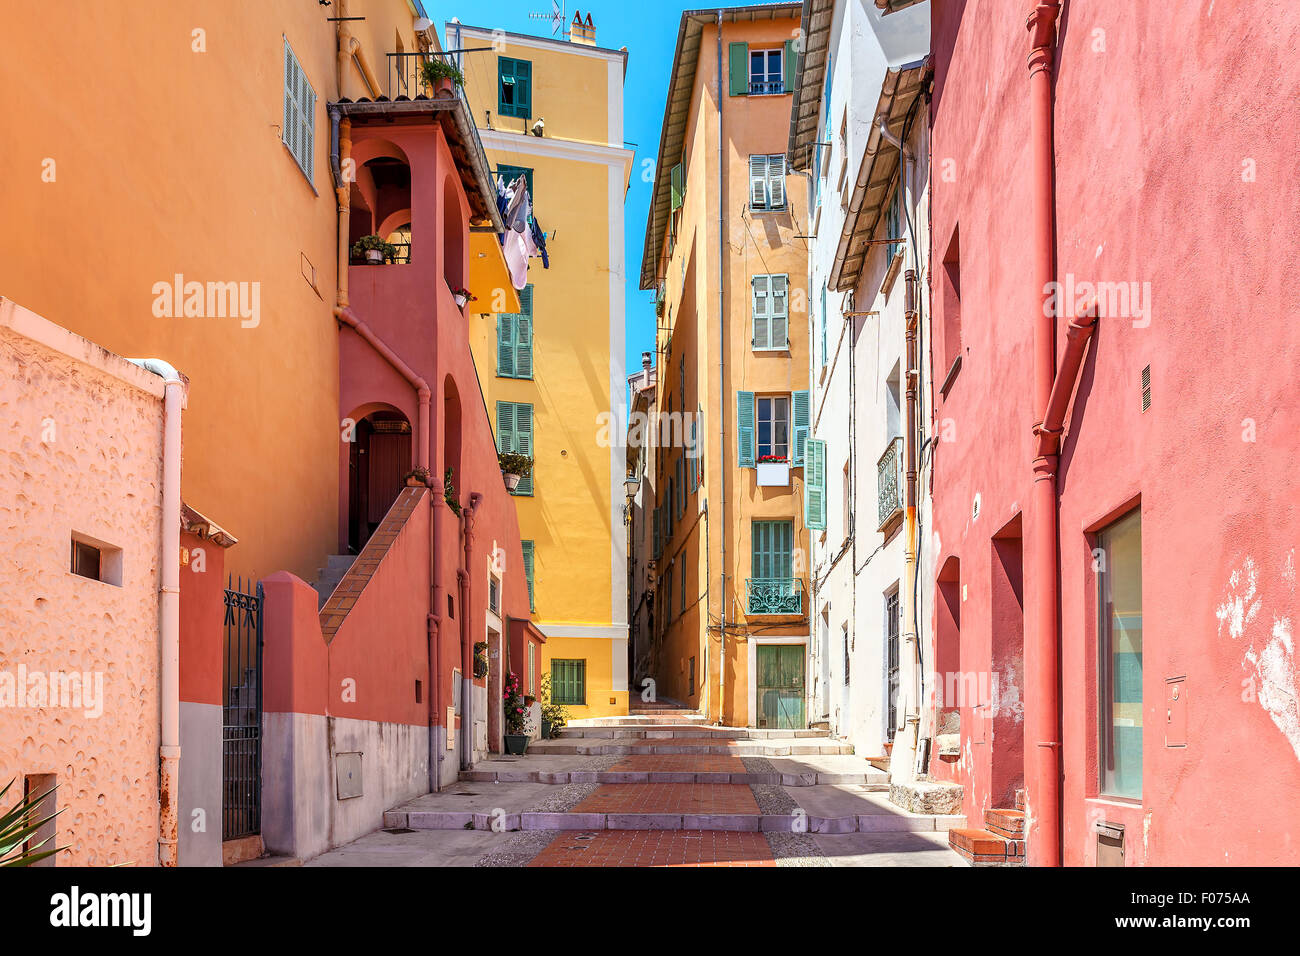 Narrow street among old colorful houses in Menton, France. Stock Photo